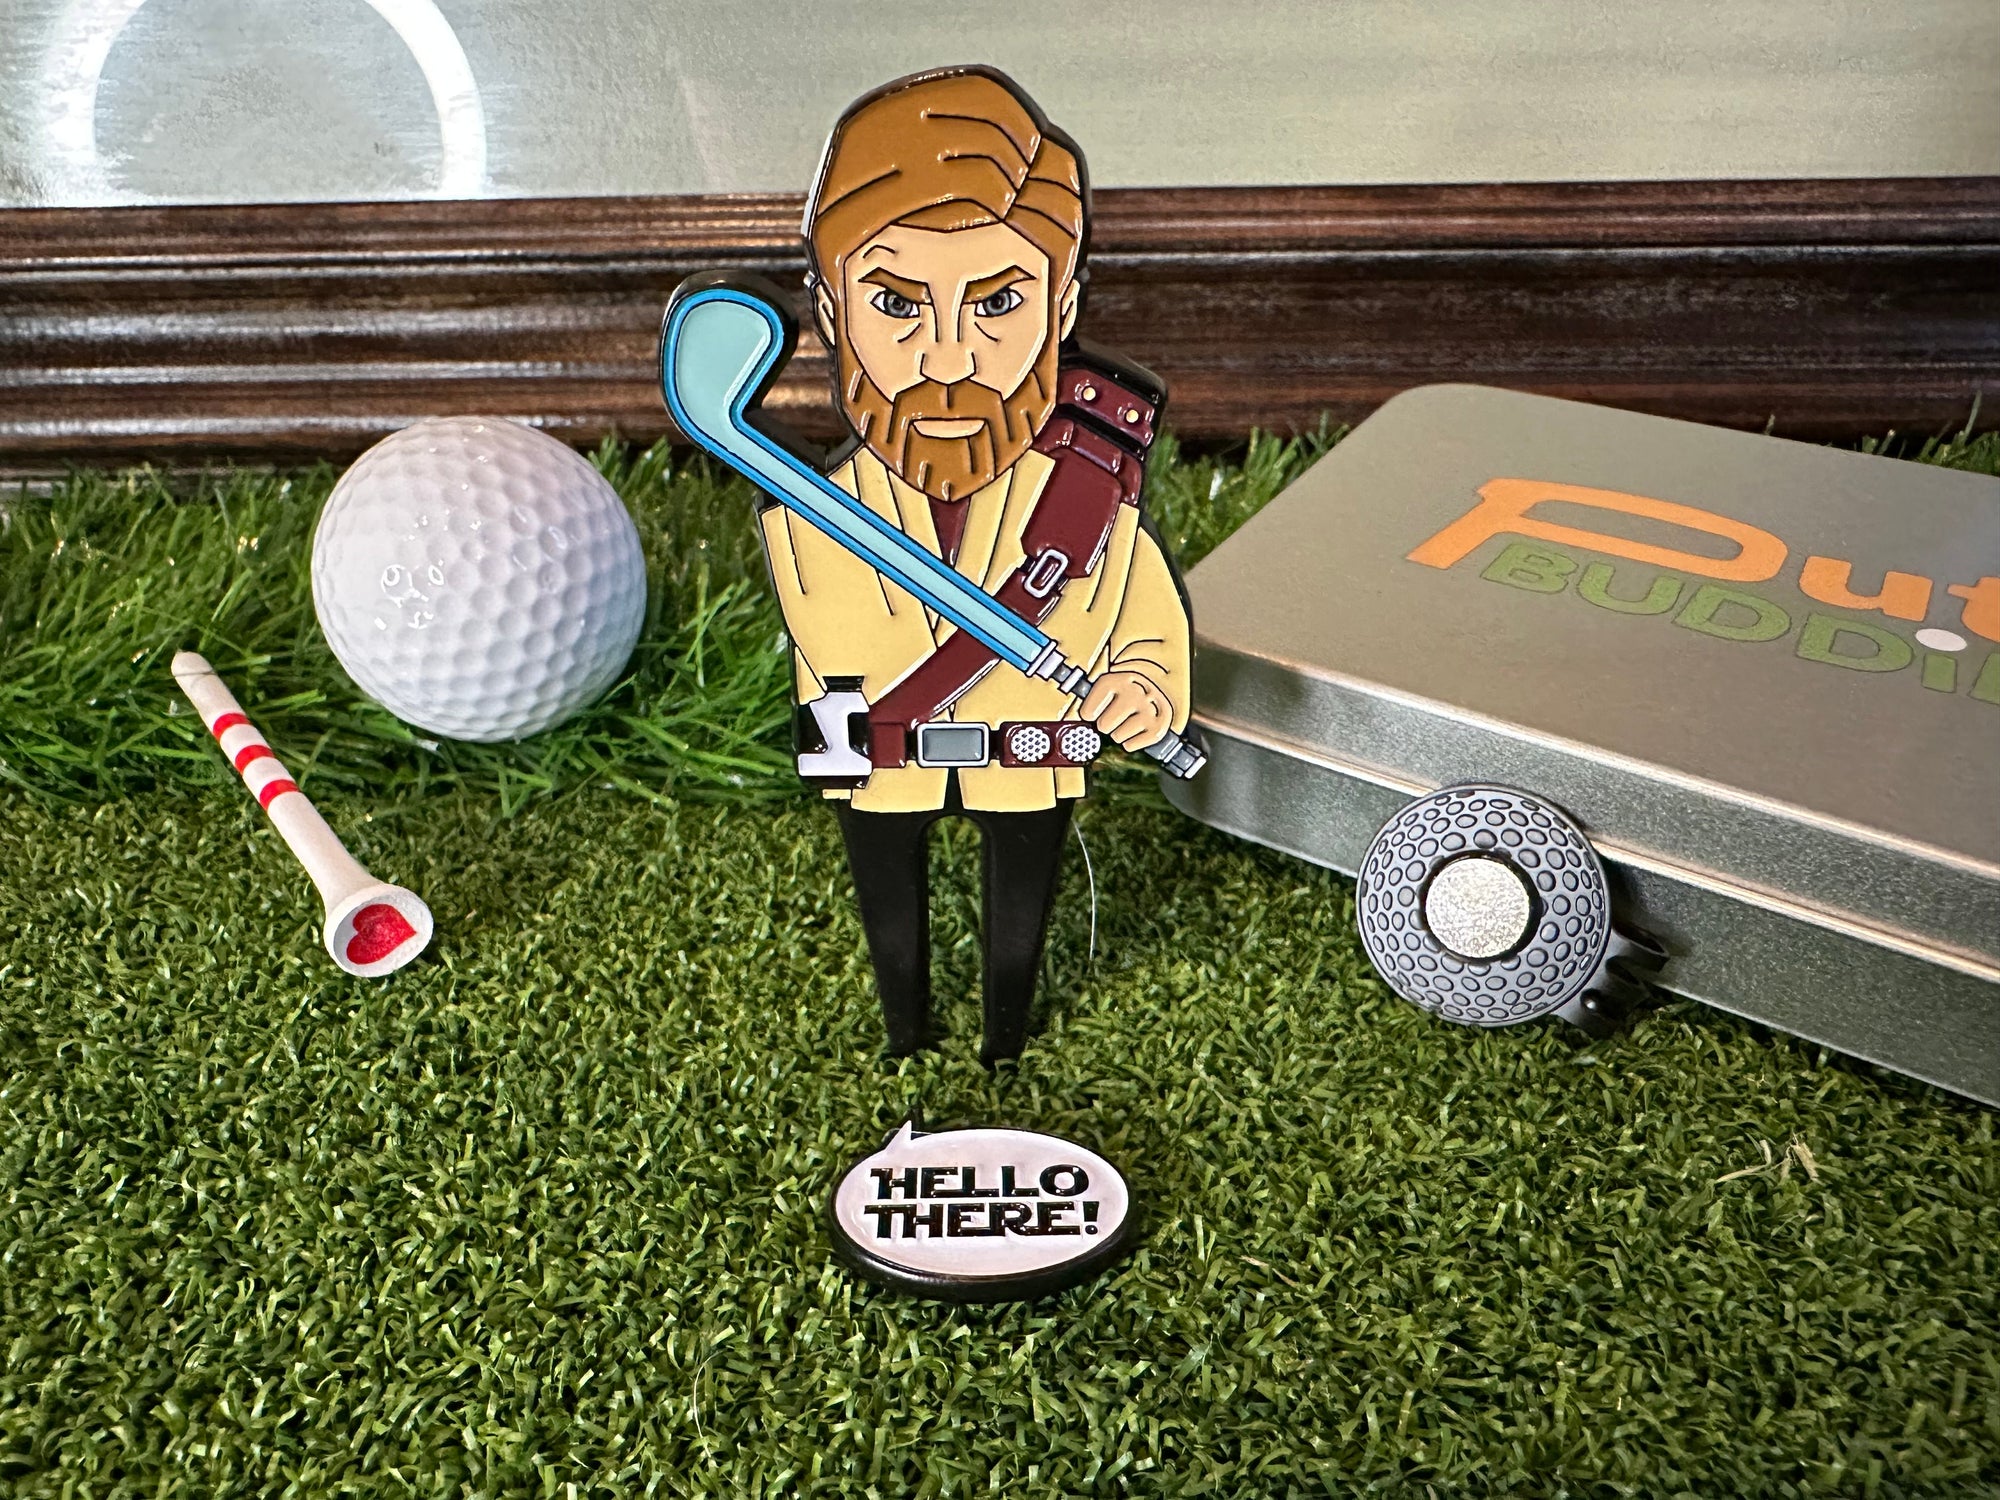 Hole-In-Wan Kenobi Golf Divot Tool w/ magnetic “Hello There” ball marker